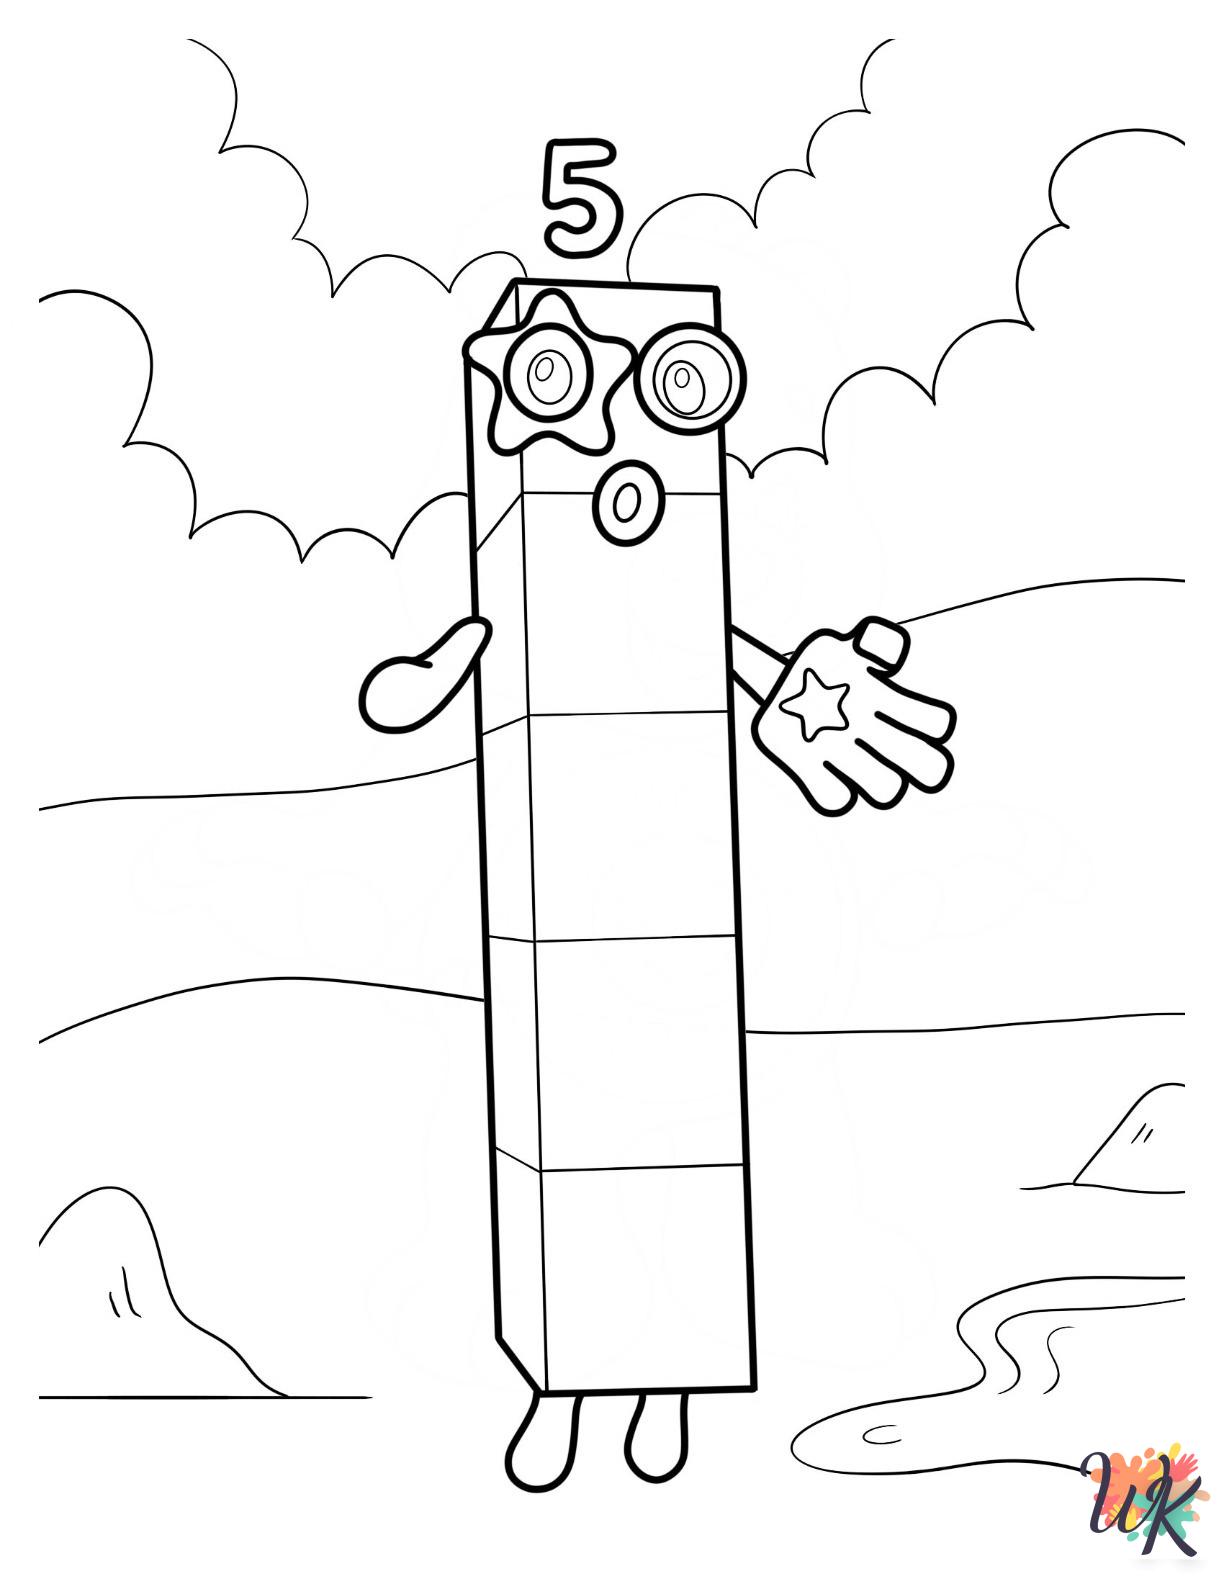 Numberblocks coloring pages to print 1